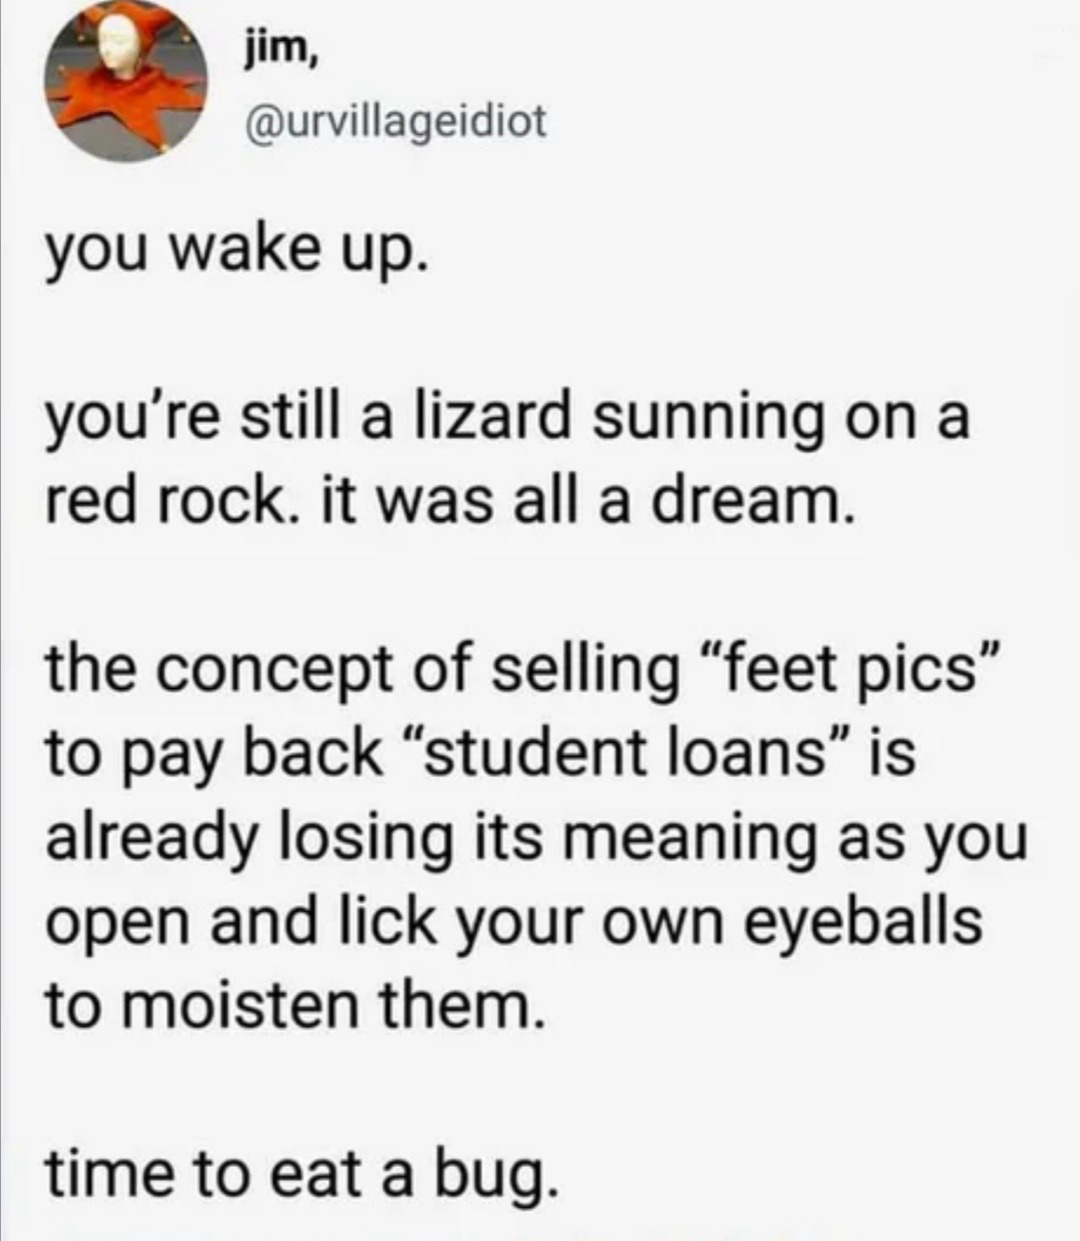 document - jim, you wake up. you're still a lizard sunning on a red rock. it was all a dream. the concept of selling "feet pics to pay back student loans" is already losing its meaning as you open and lick your own eyeballs to moisten them. time to eat a 